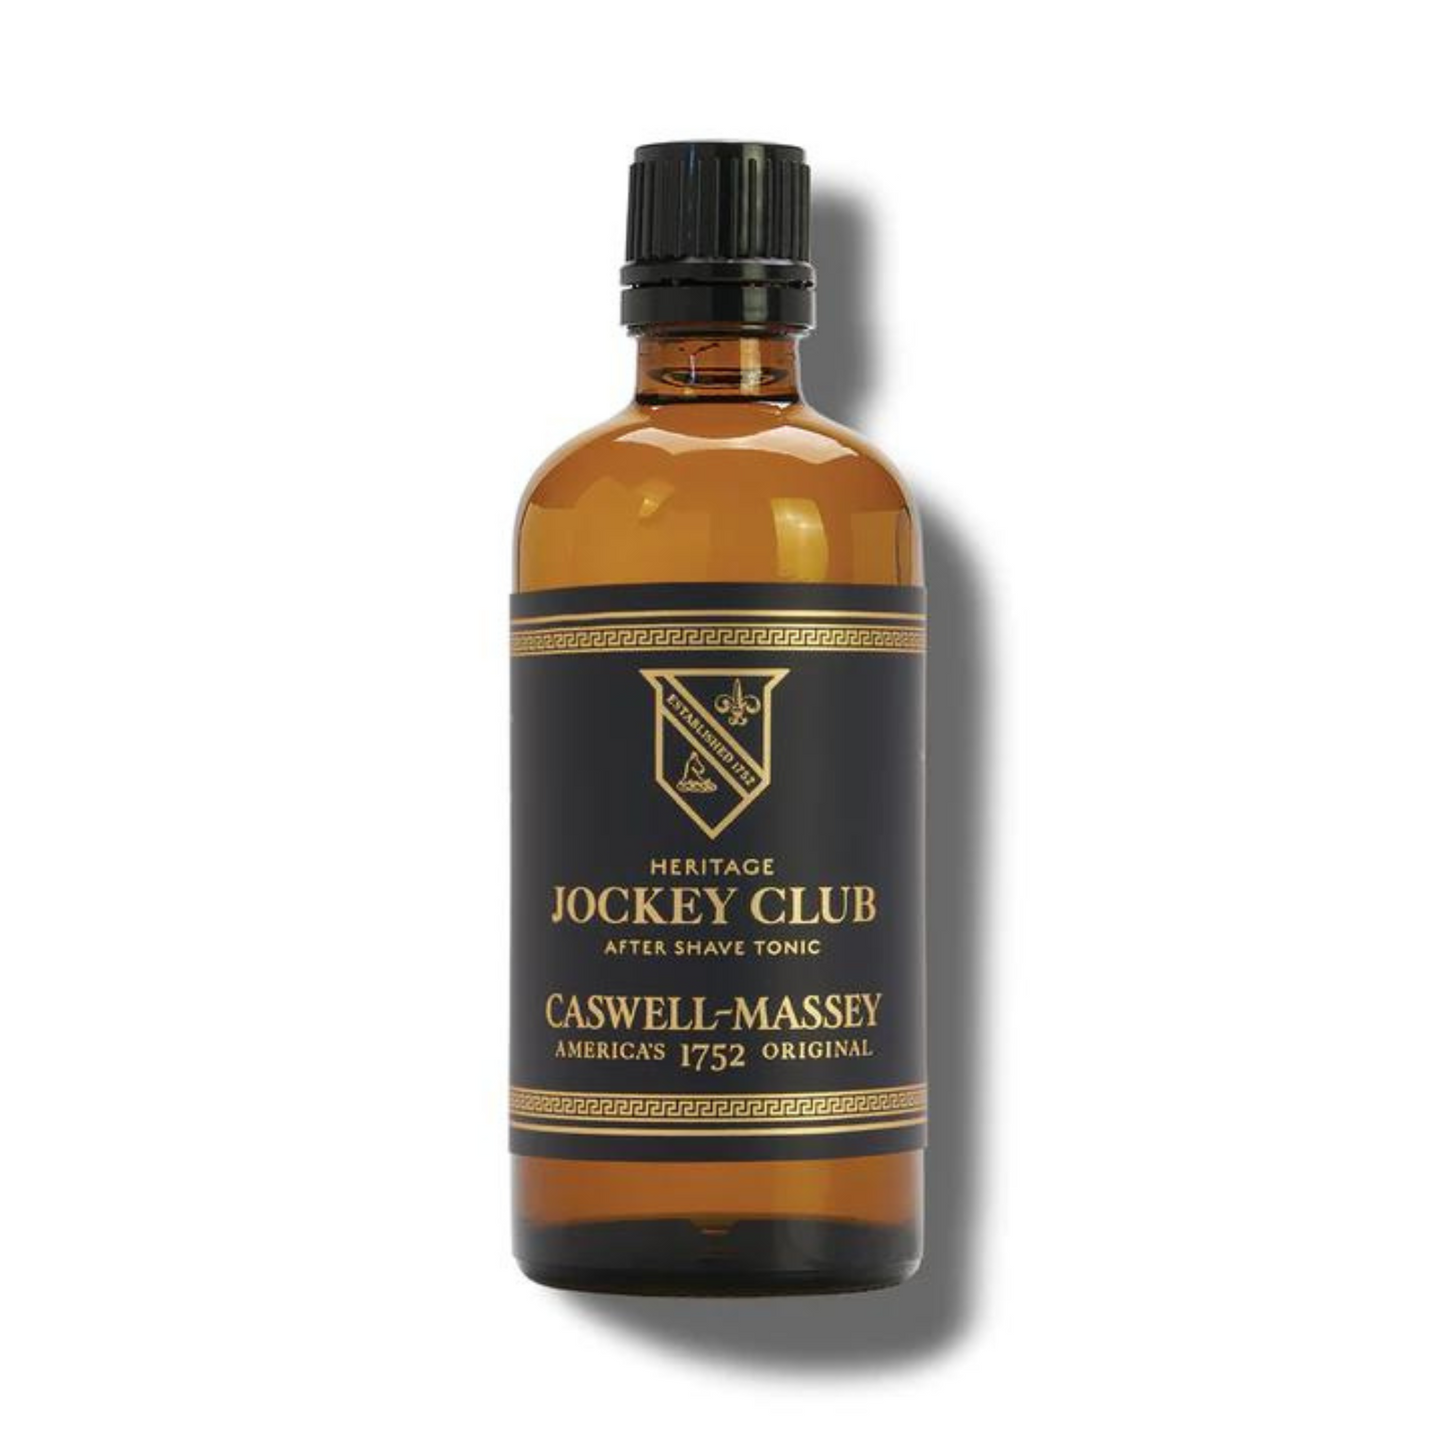 Primary Image of Jockey Club After Shave (3.4 fl oz)